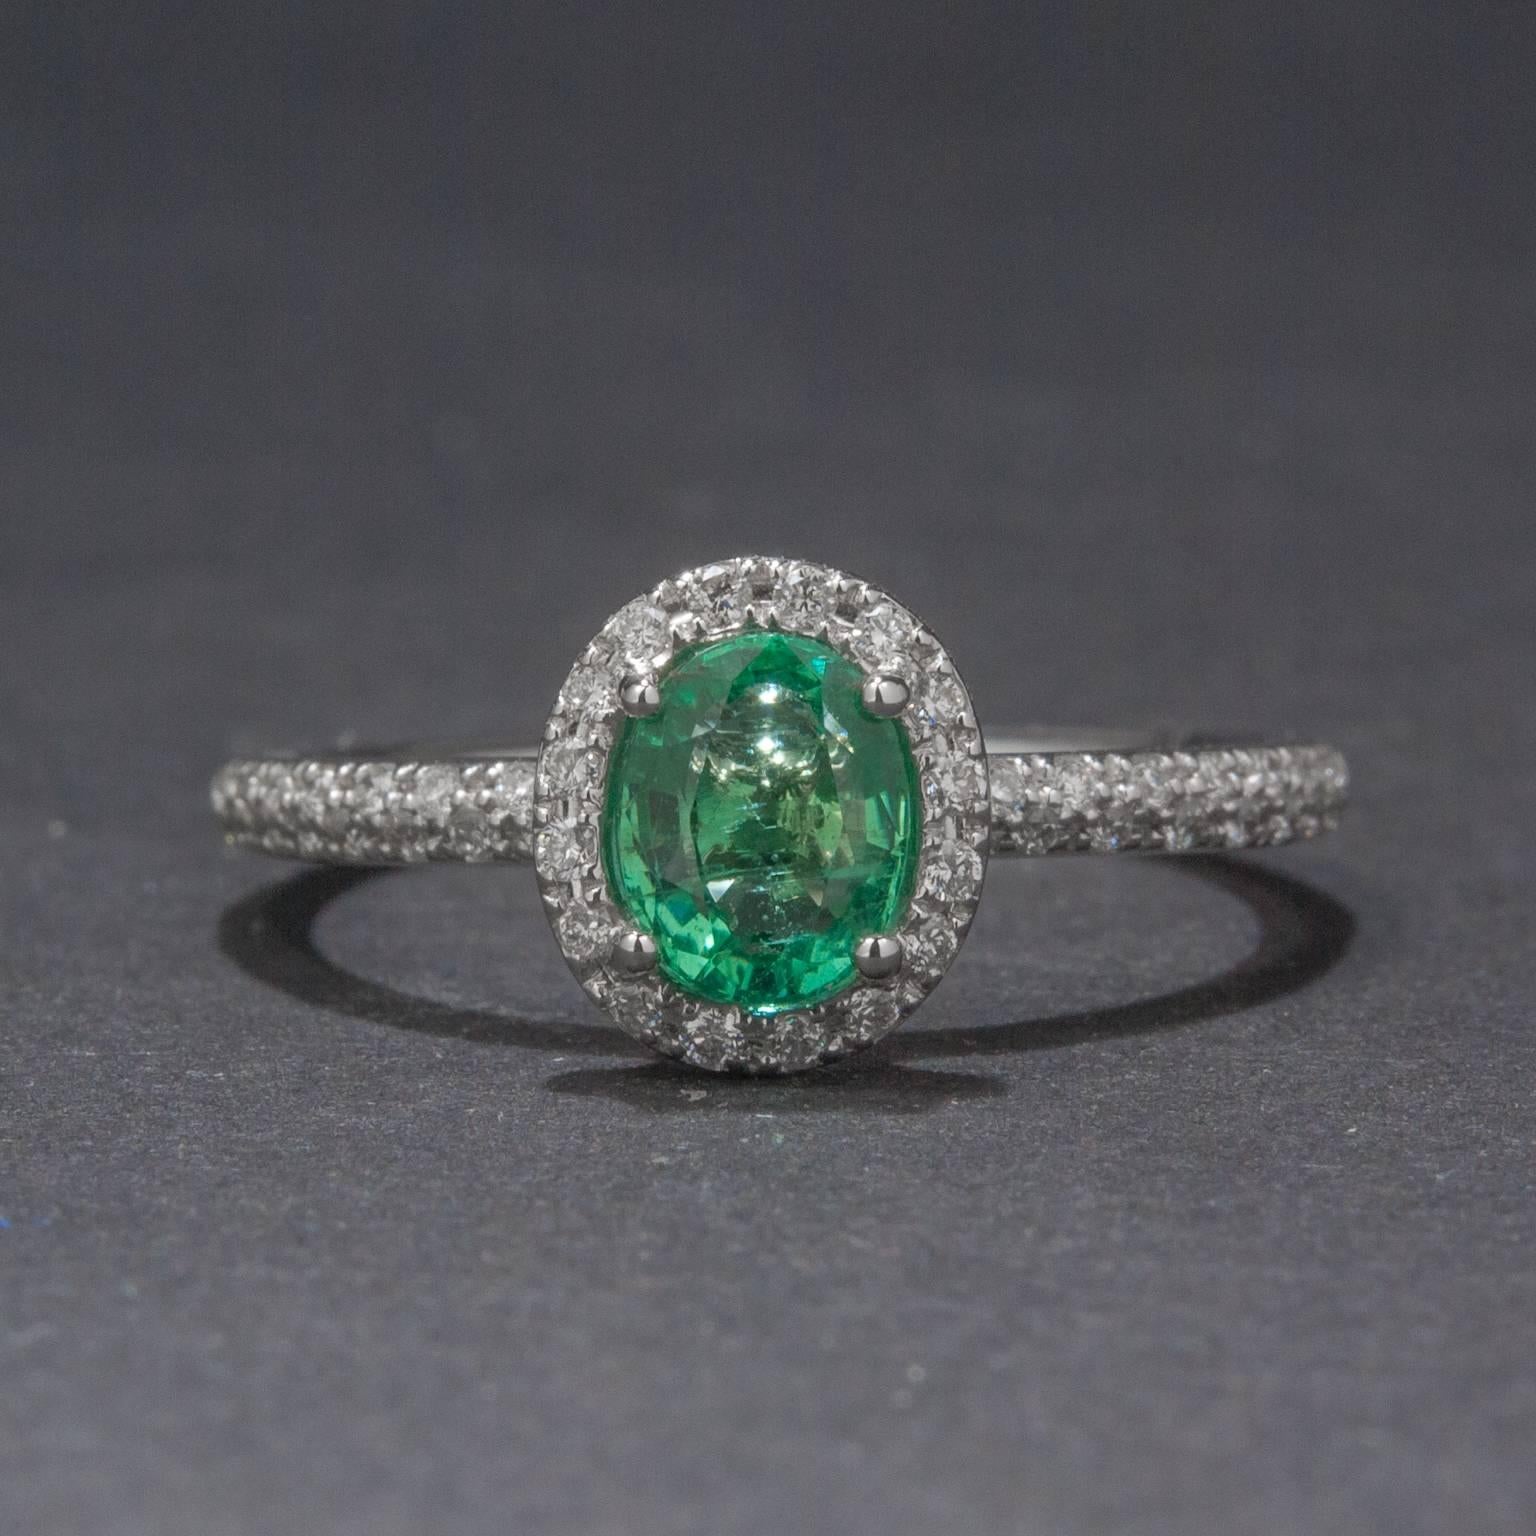 A supremely elegant ring with a .66 carat emerald at the center. The center emerald is haloed by 48 accent diamonds weighing a total of .20 carats. This beautiful piece is made in 18k white gold.